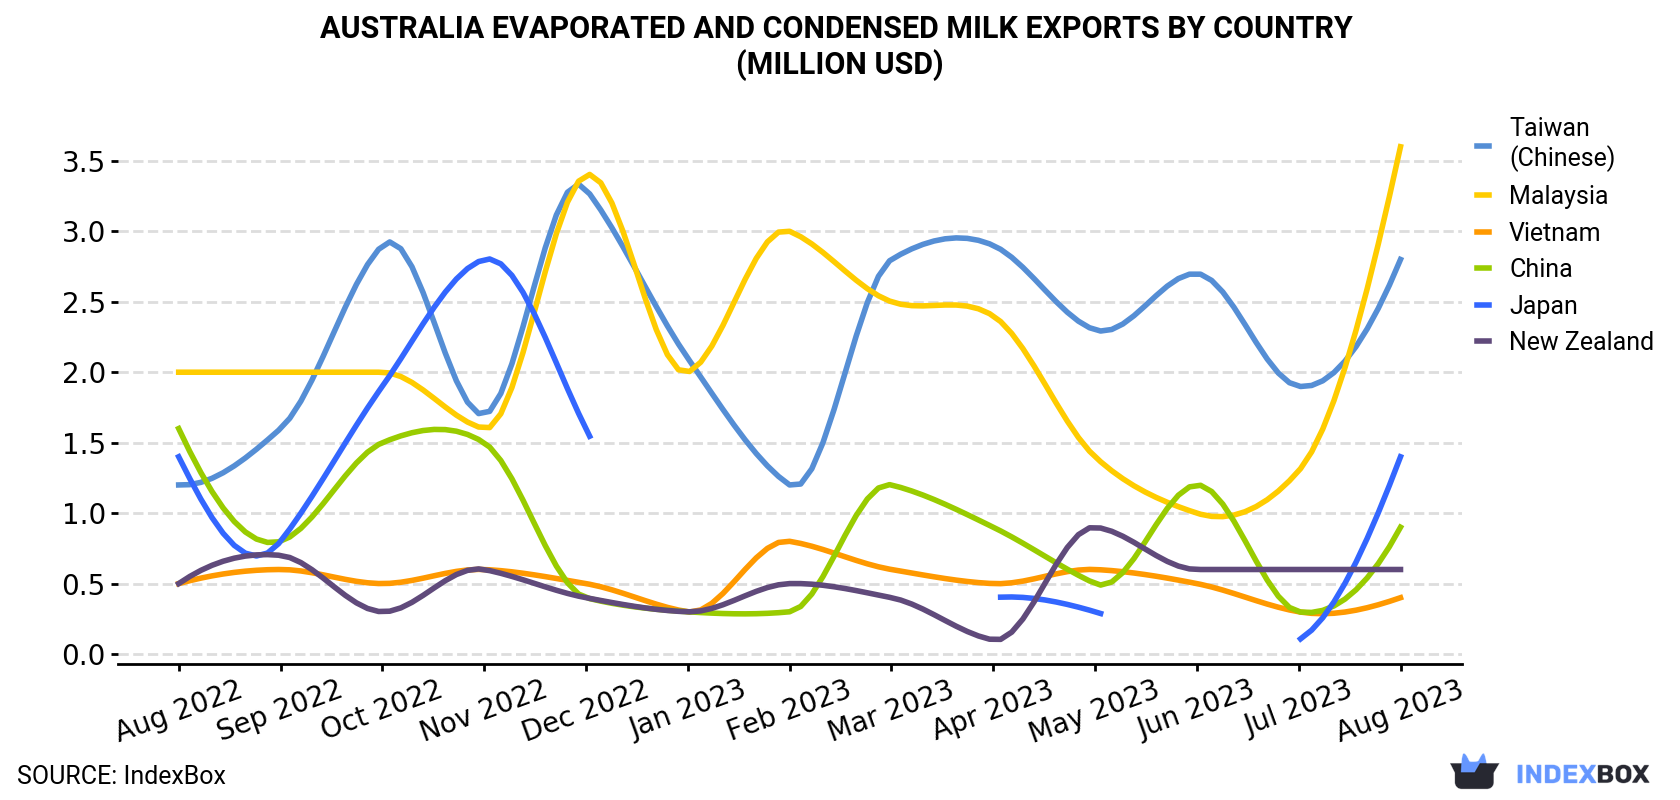 Australia Evaporated And Condensed Milk Exports By Country (Million USD)